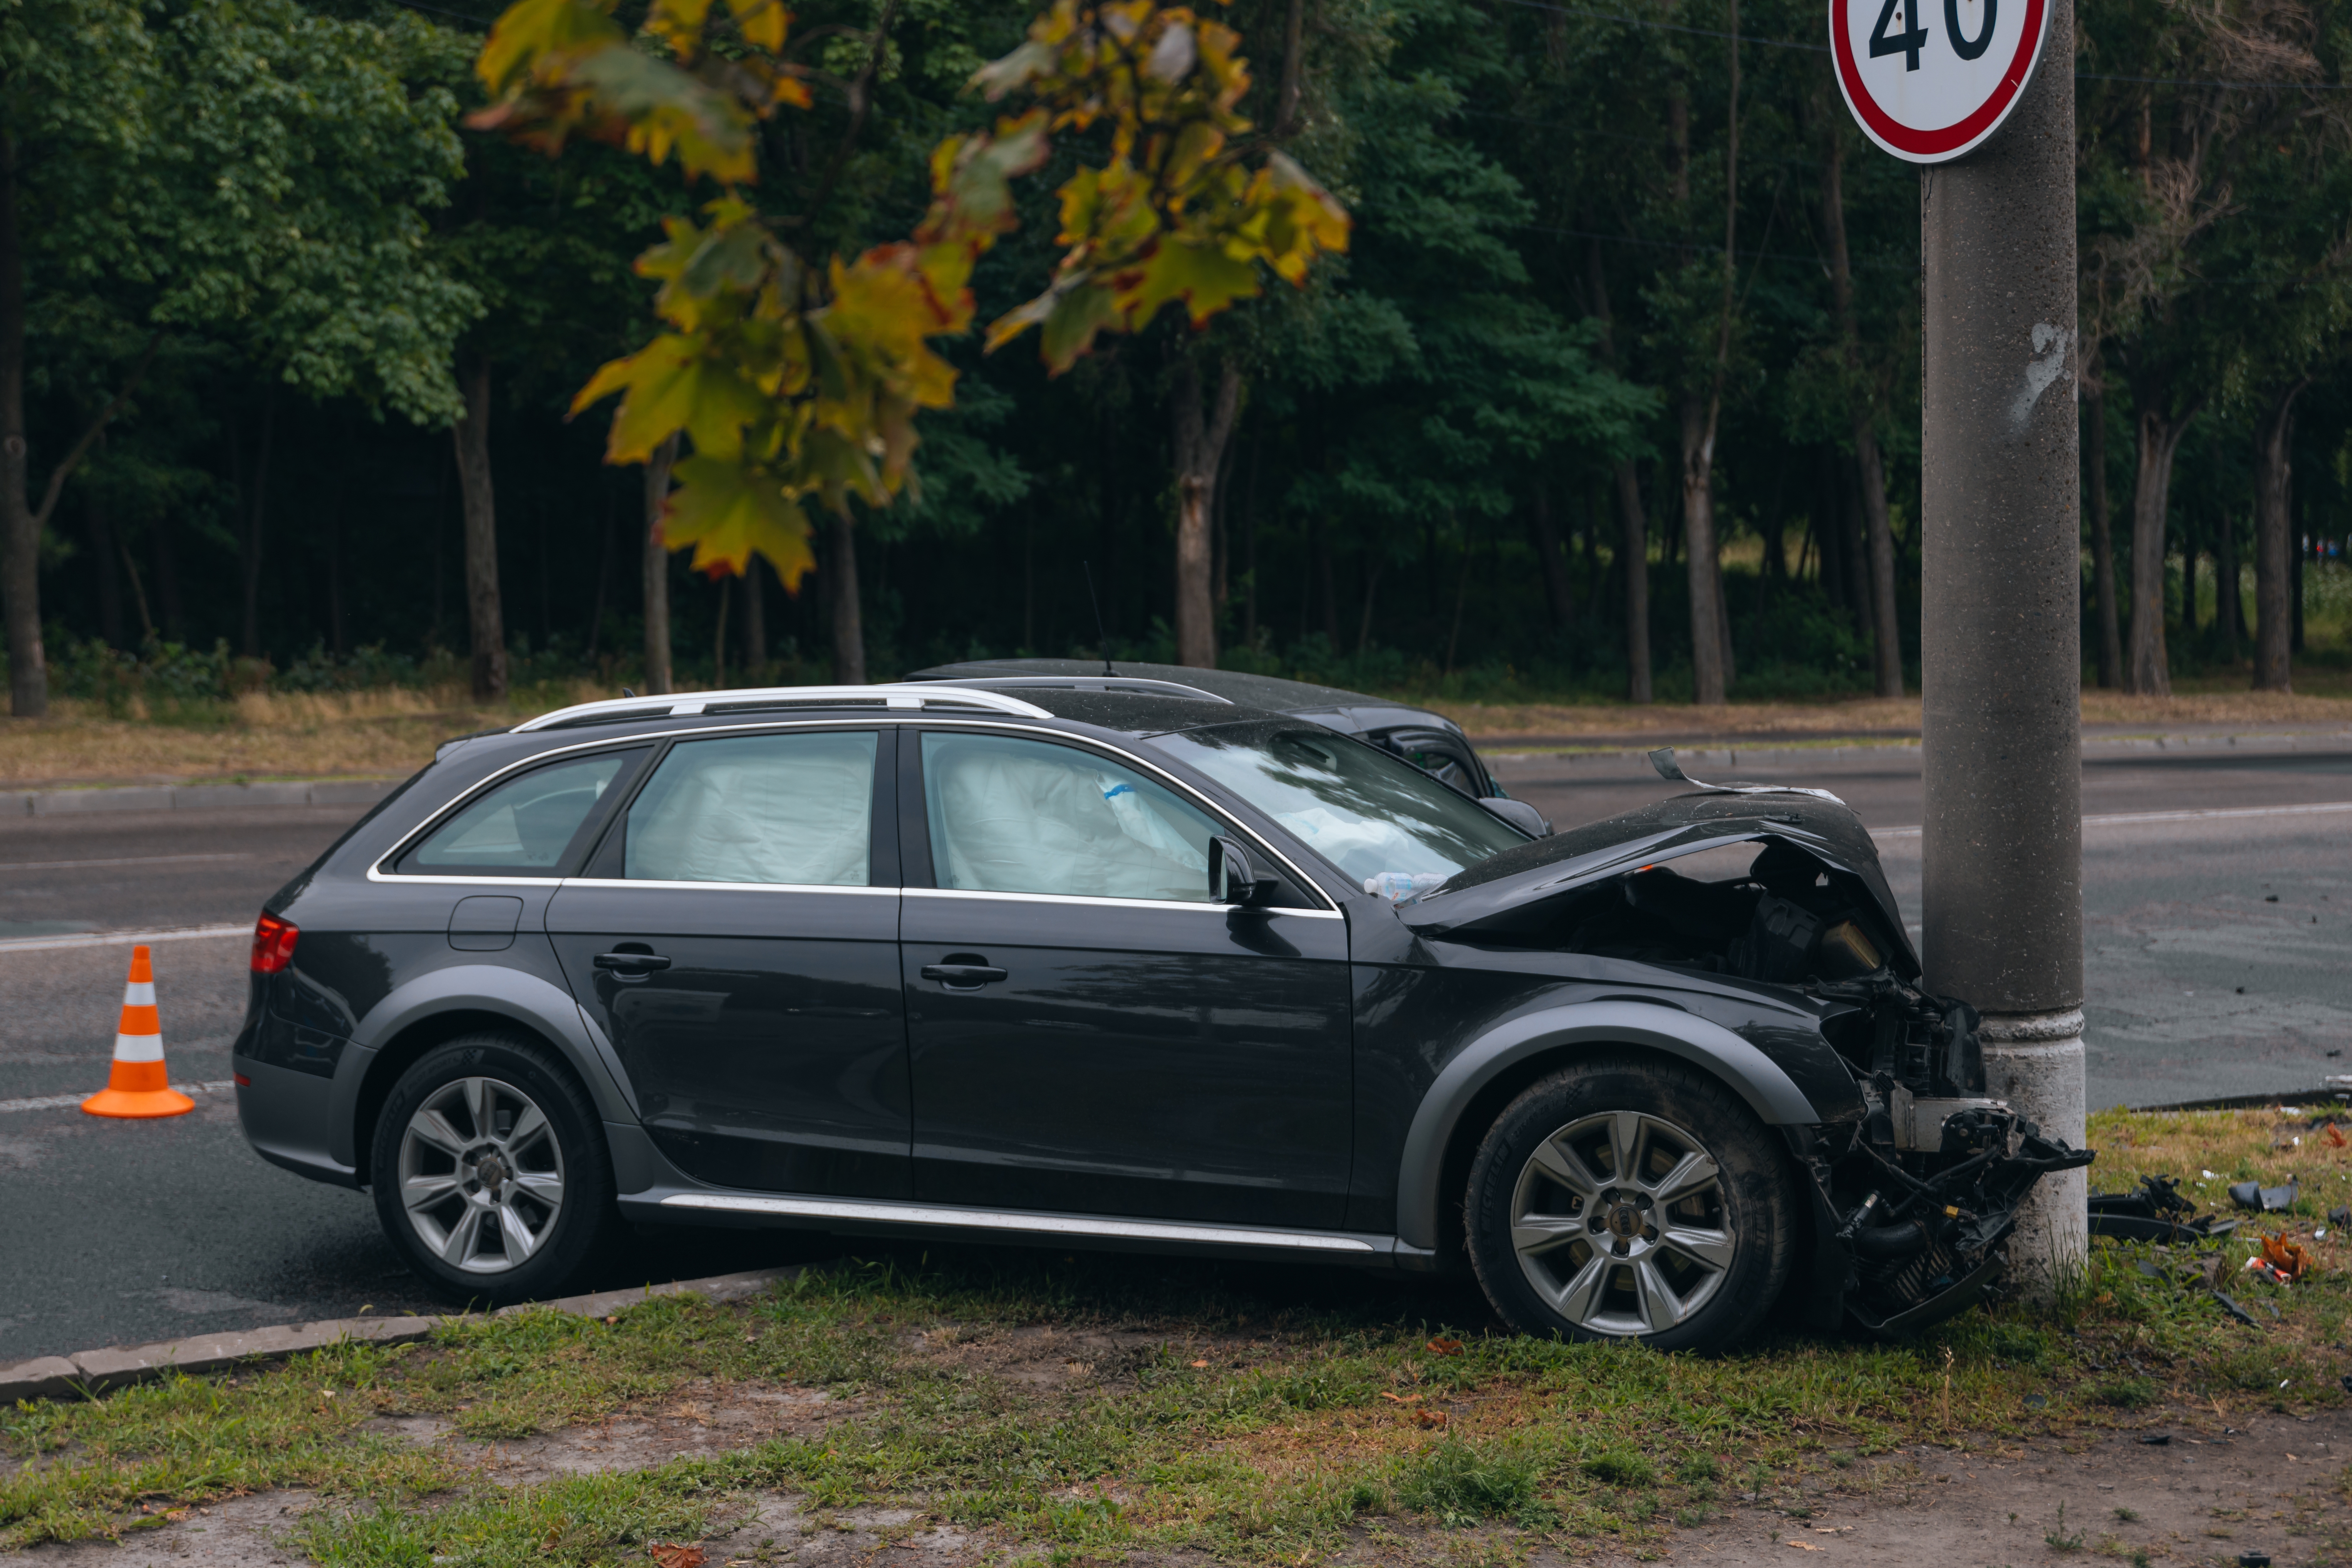 A car that had crashed into a pole | Source: Shutterstock